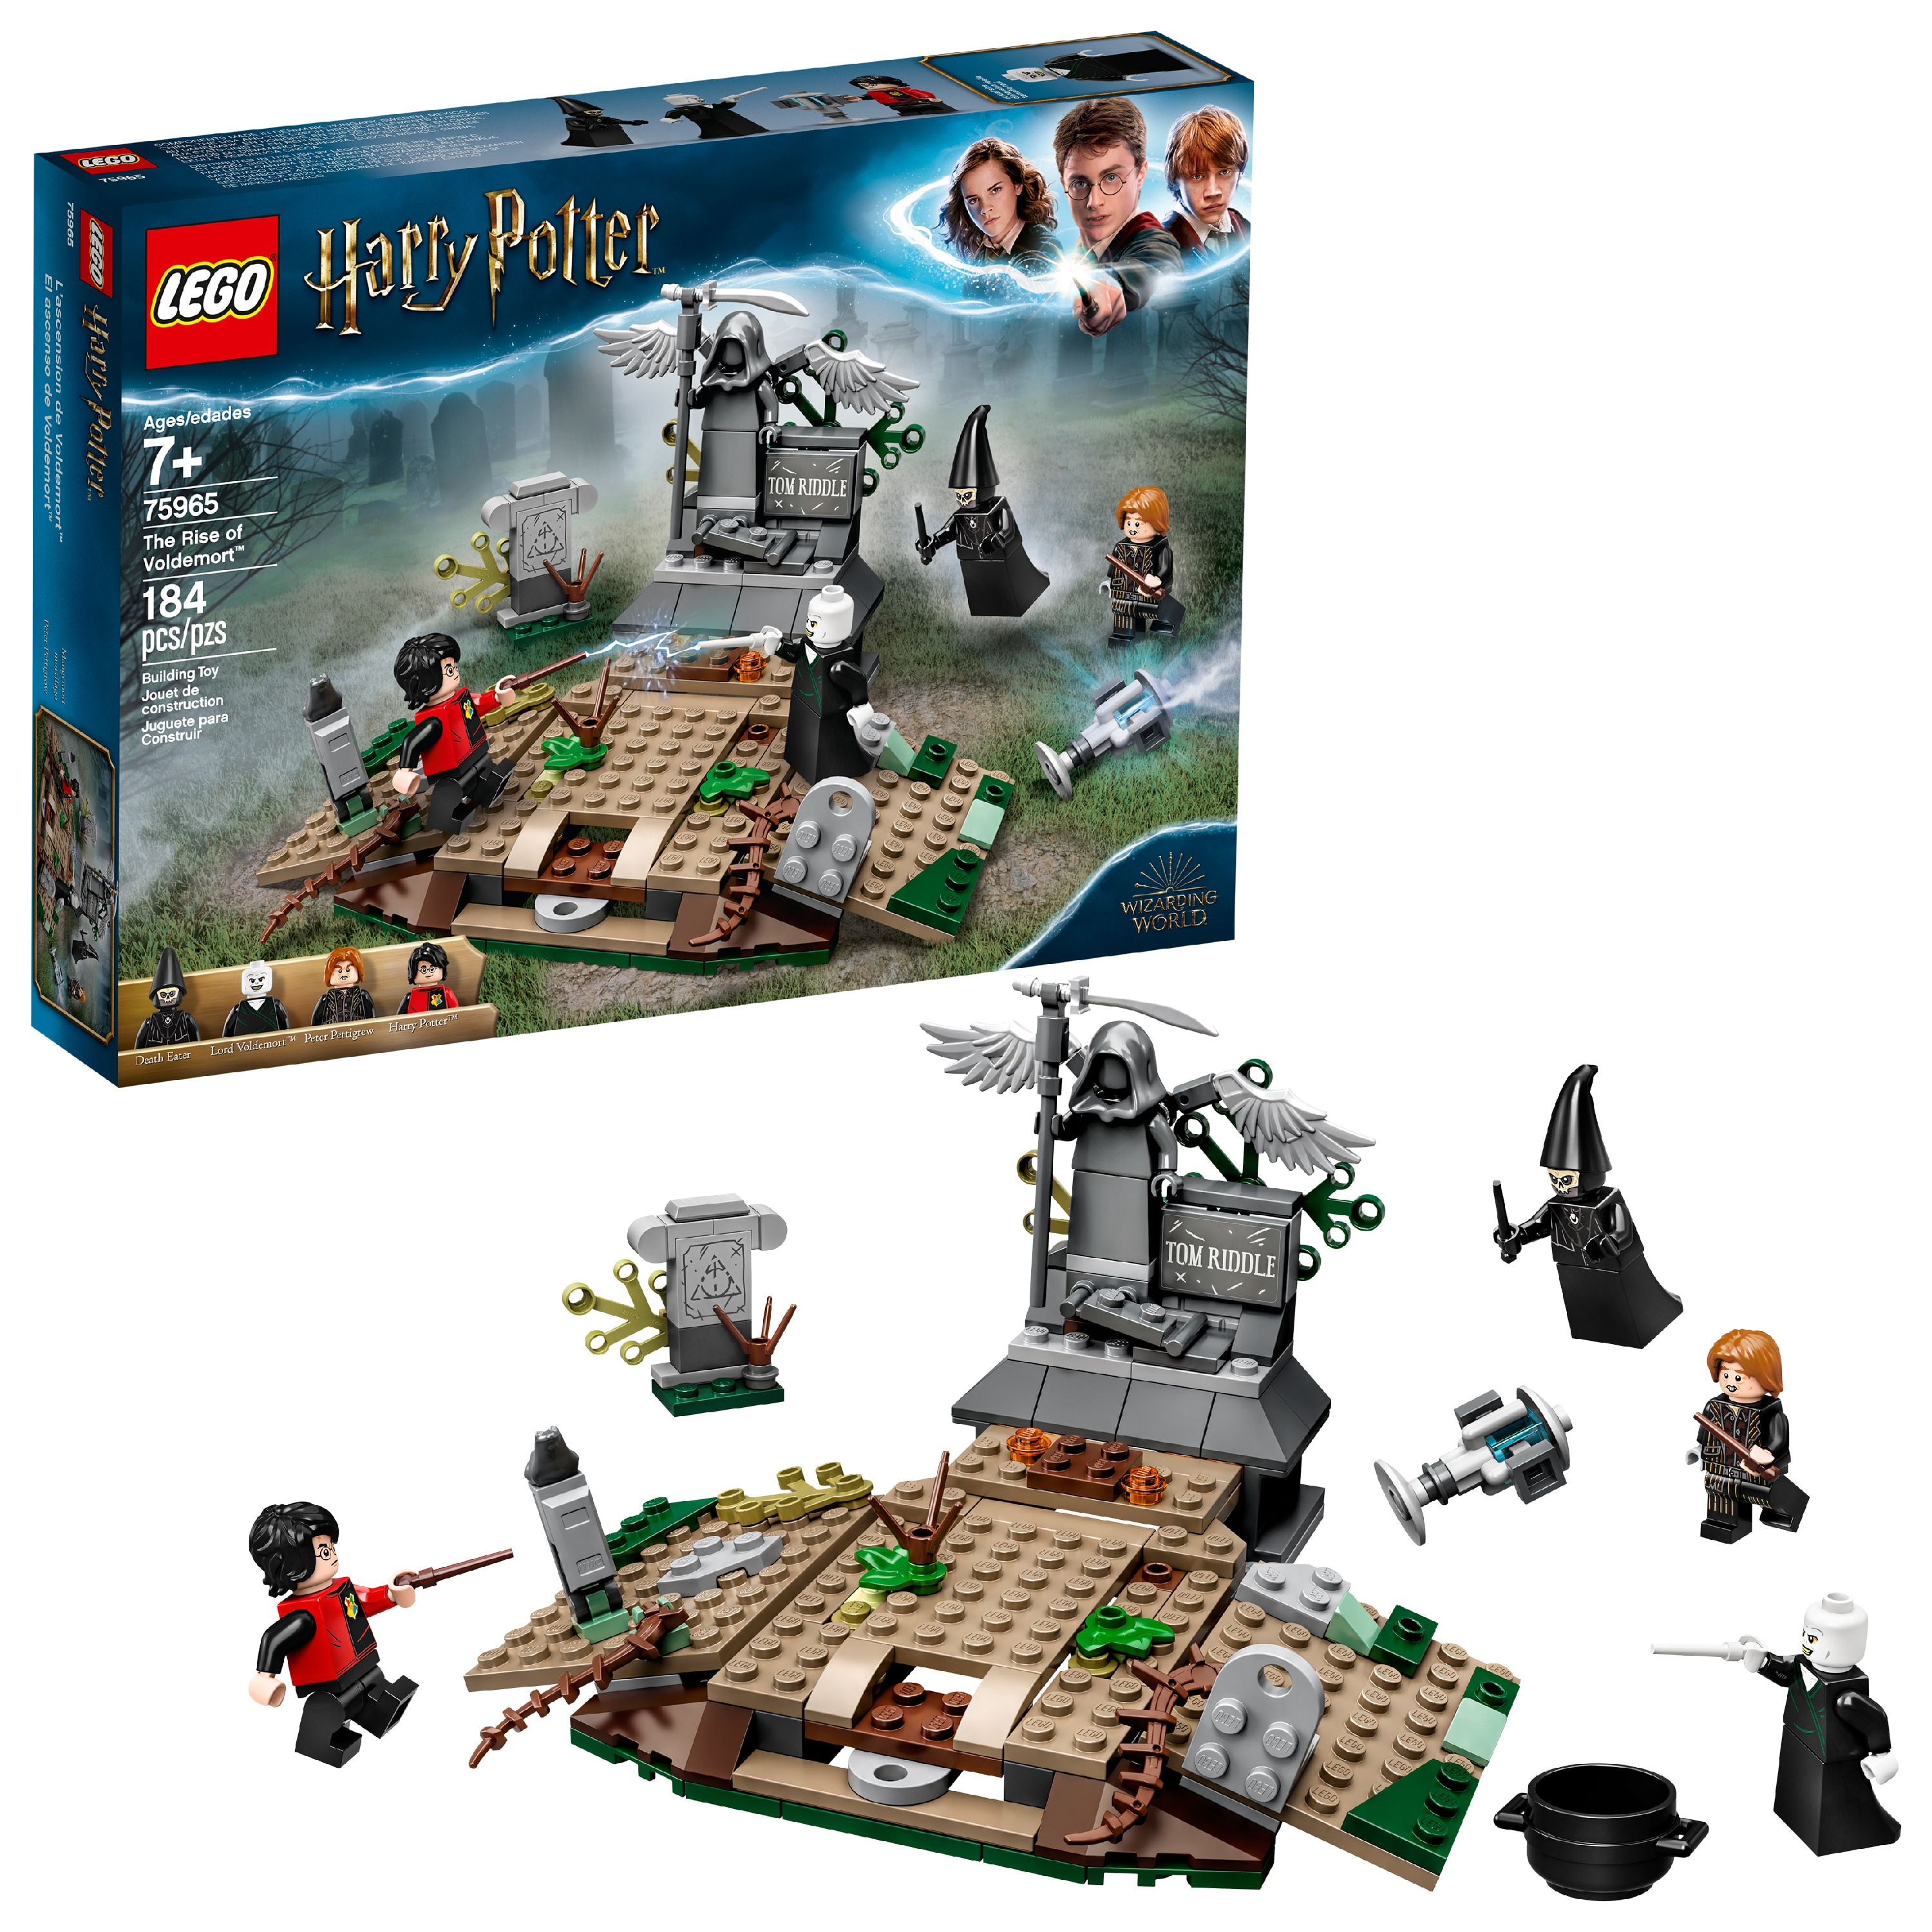 Expecto Patronum + 75945 & 75950 Rise of Voldemort LEGO 75965 Harry Potter 